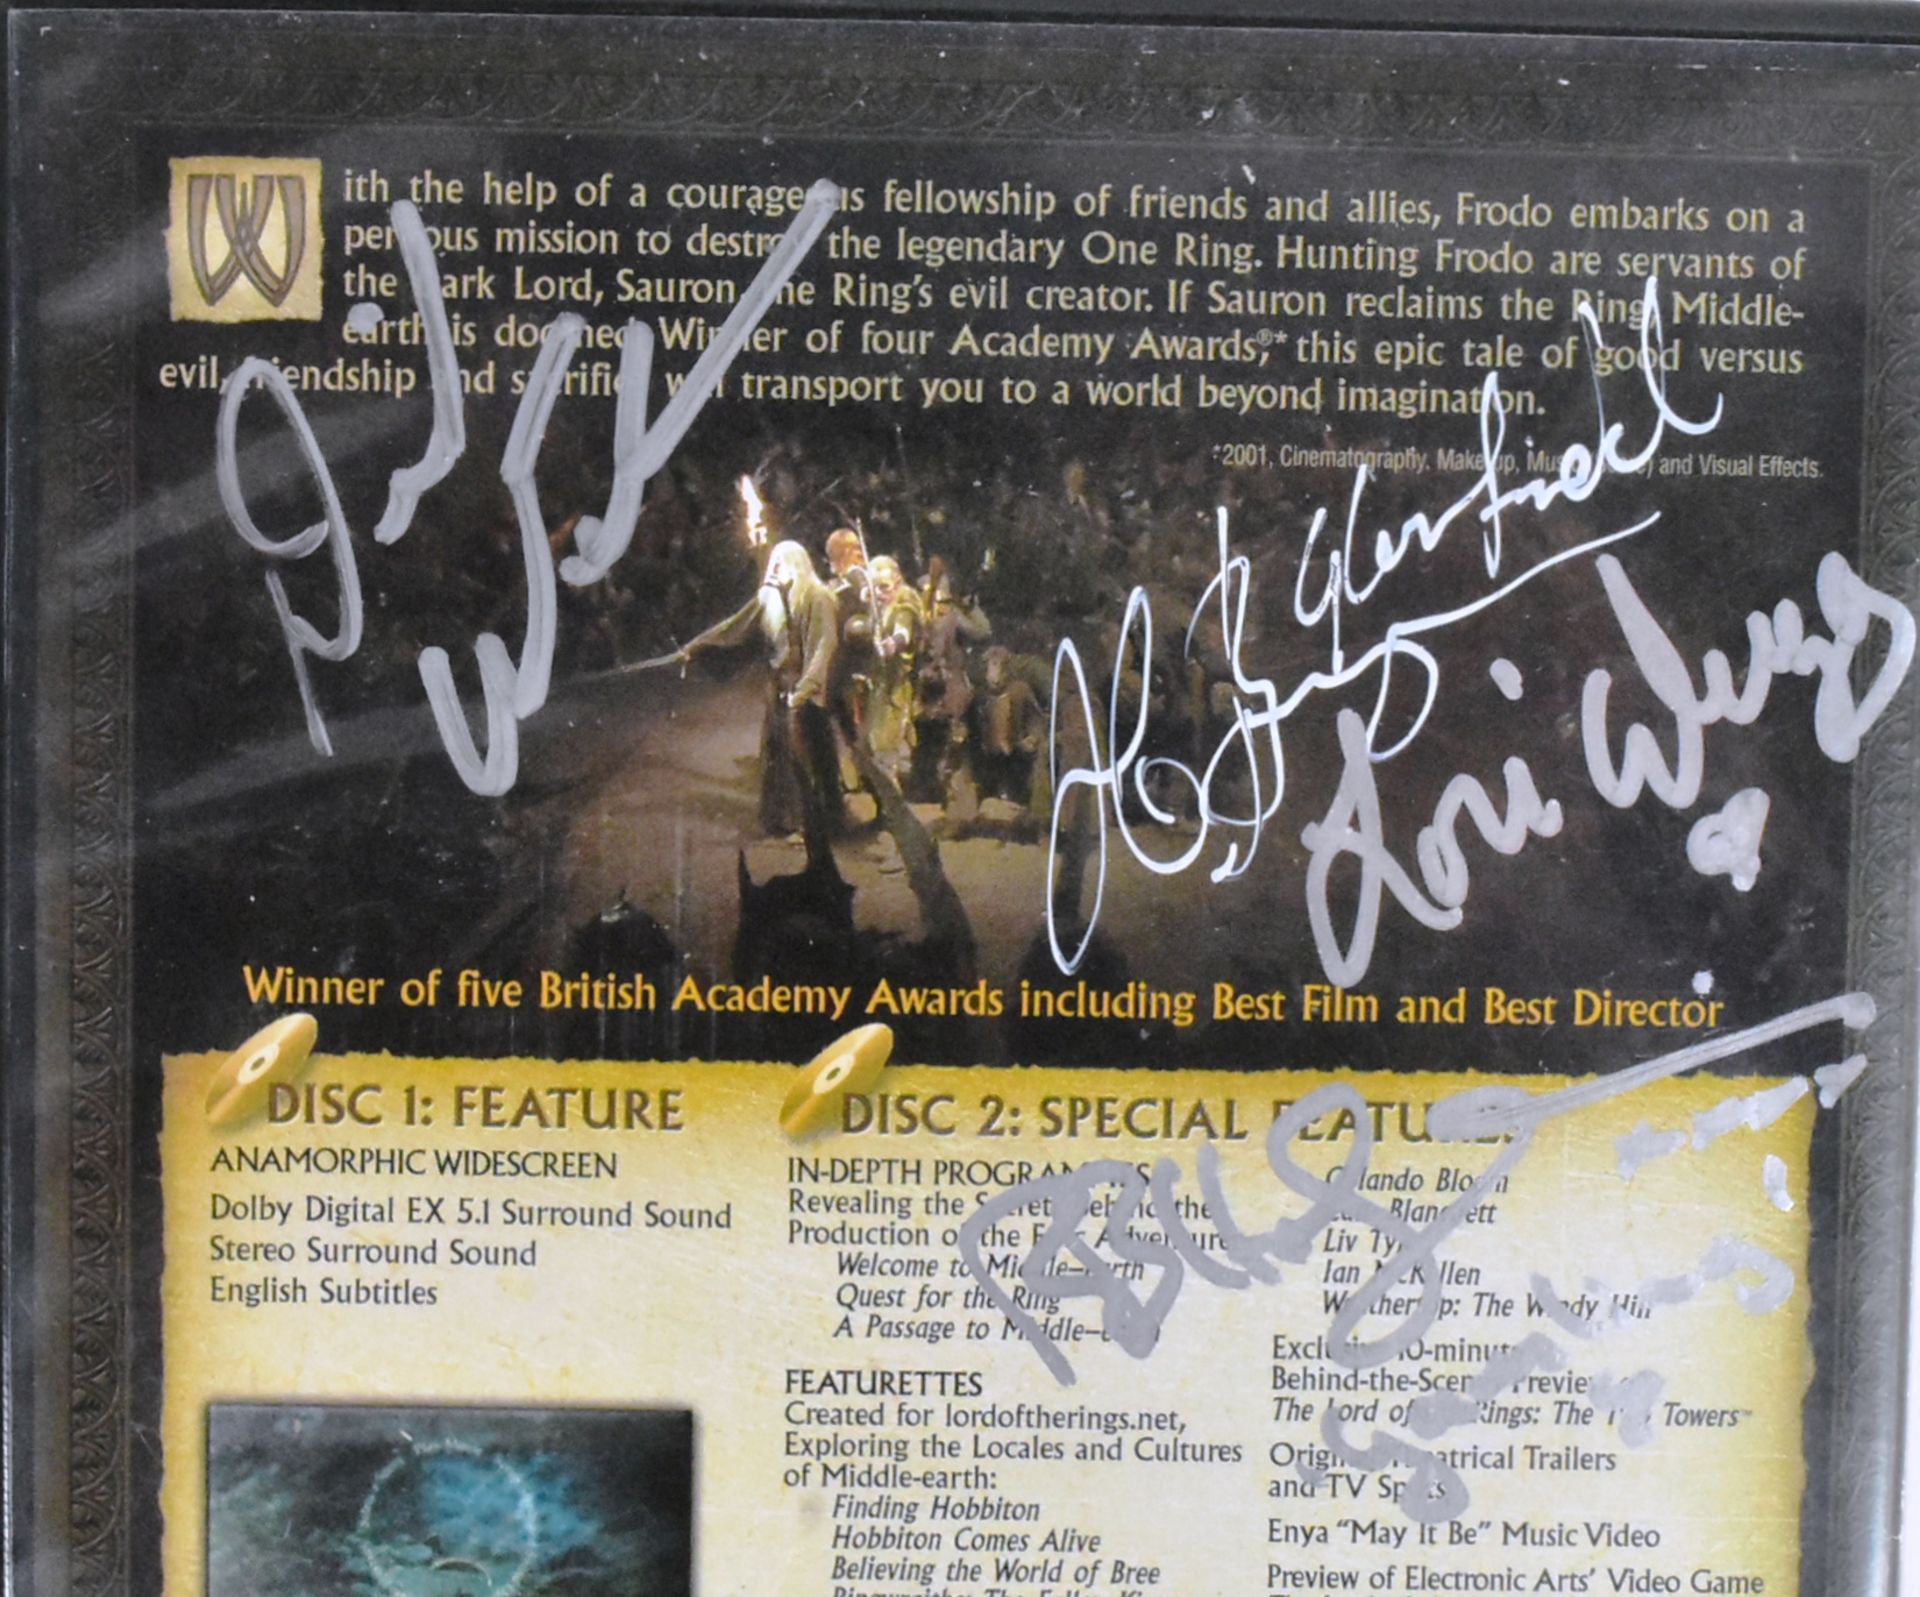 LORD OF THE RINGS - THE FELLOWSHIP OF THE RING - SIGNED DVD - Image 6 of 8